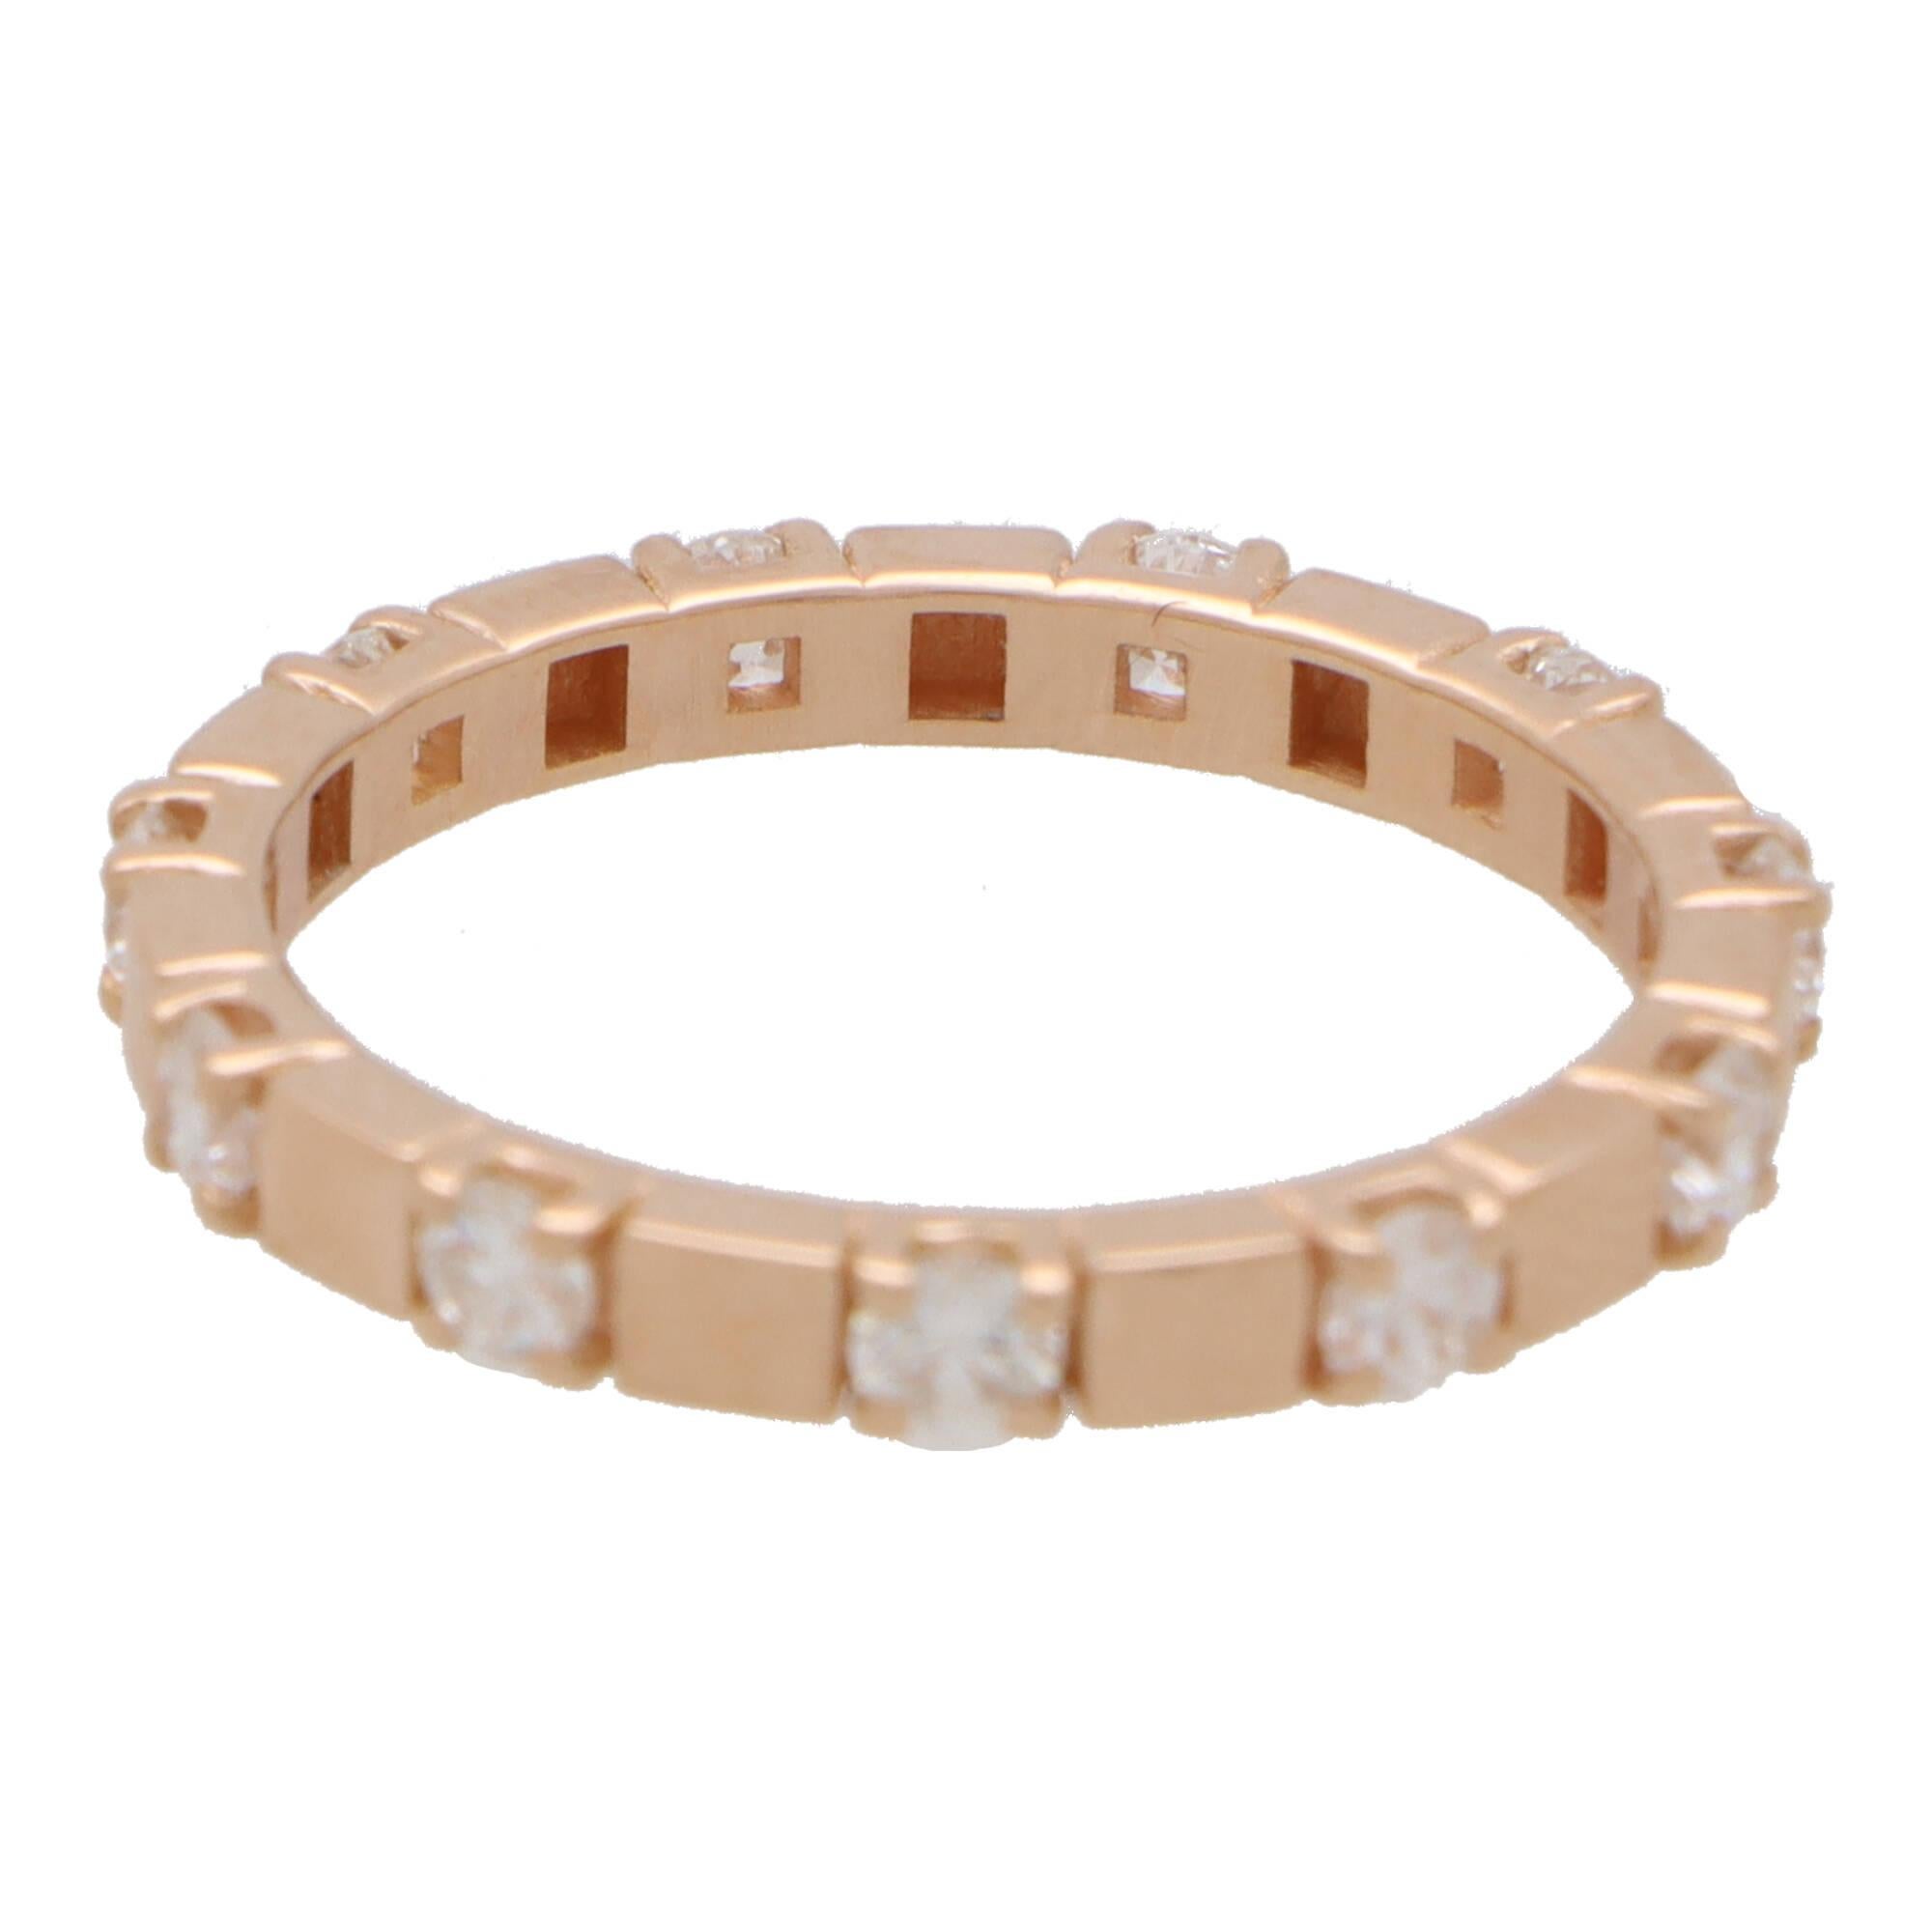 A unique contemporary diamond full eternity ring set in 18k rose gold.

The eternity ring is set with exactly 11 round brilliant cut diamonds; all of which are claw set within a 2.5-millimetre band (there is a height of 2-millimetres). What makes